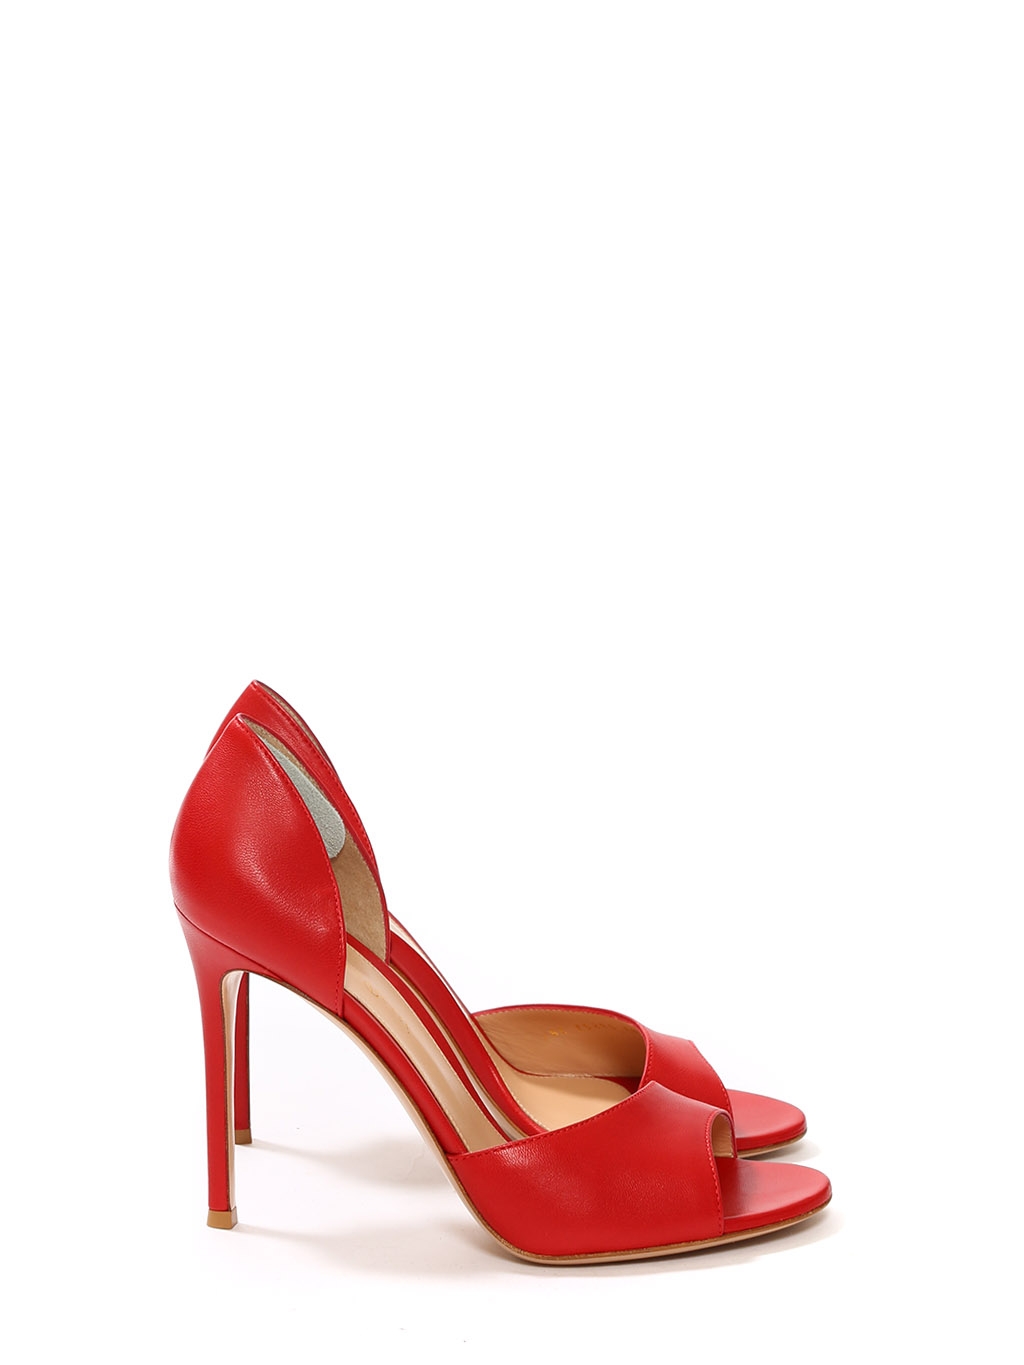 cherry red shoes high heels